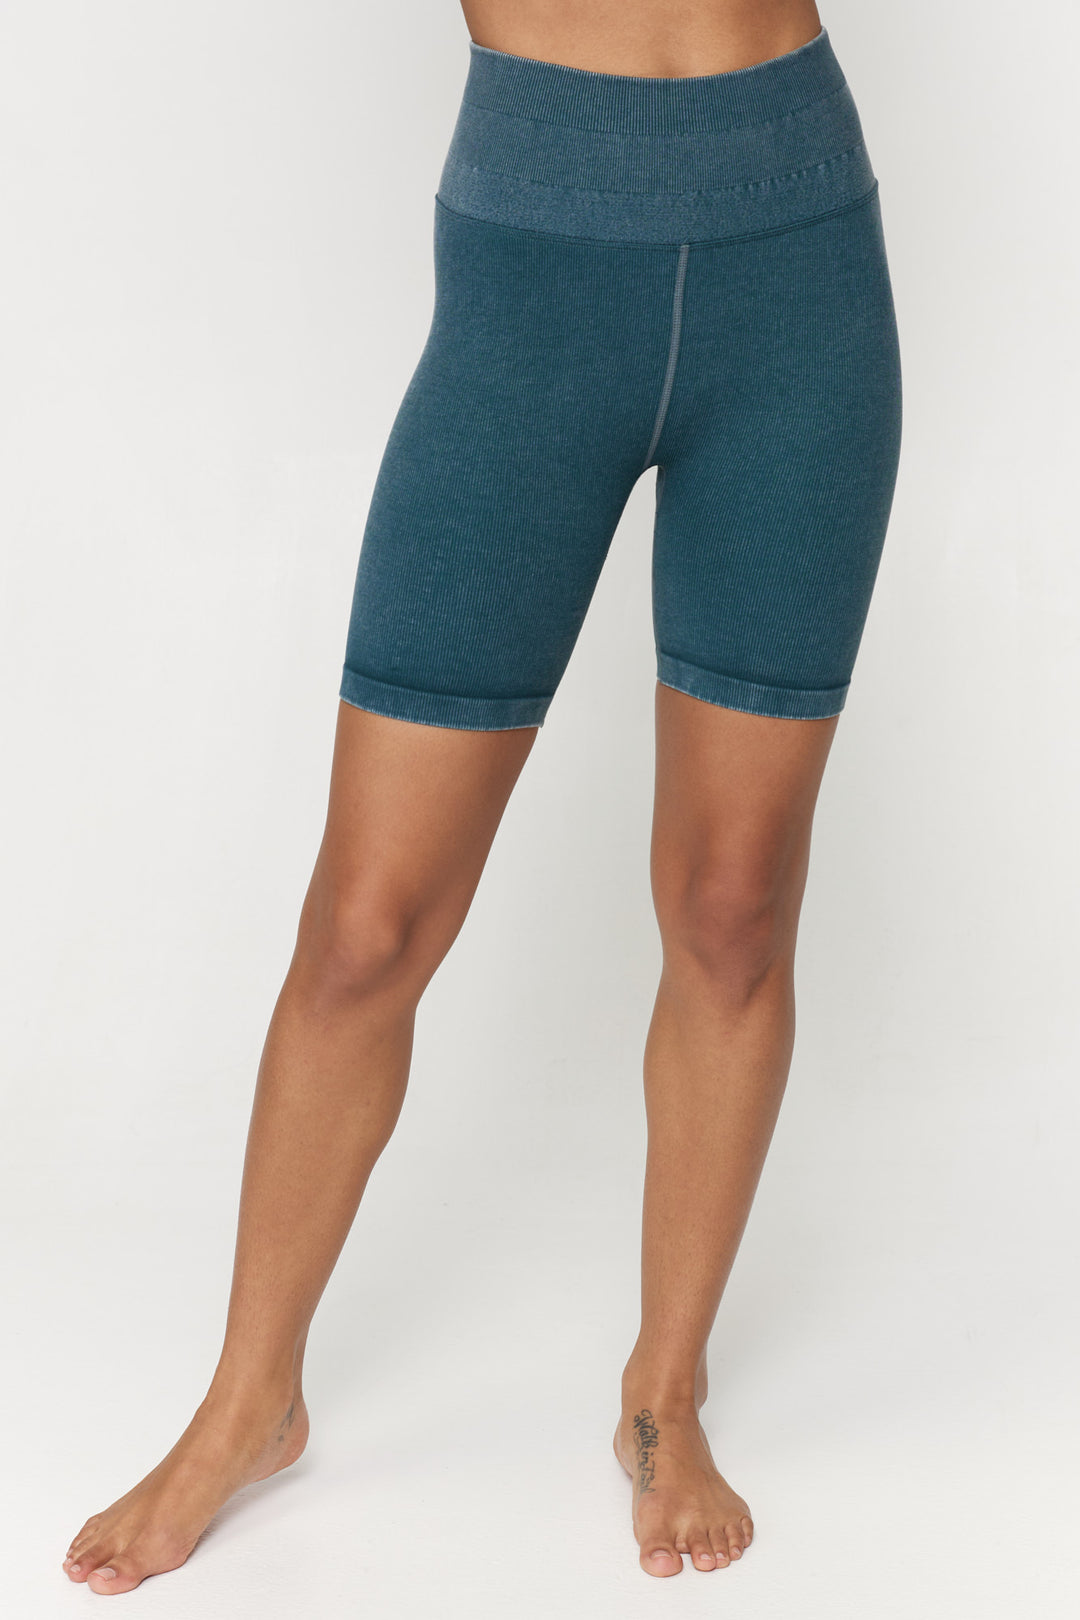 RUFFLE SHORTS - FOLIAGE SEAMLESS MINERAL - Kingfisher Road - Online Boutique